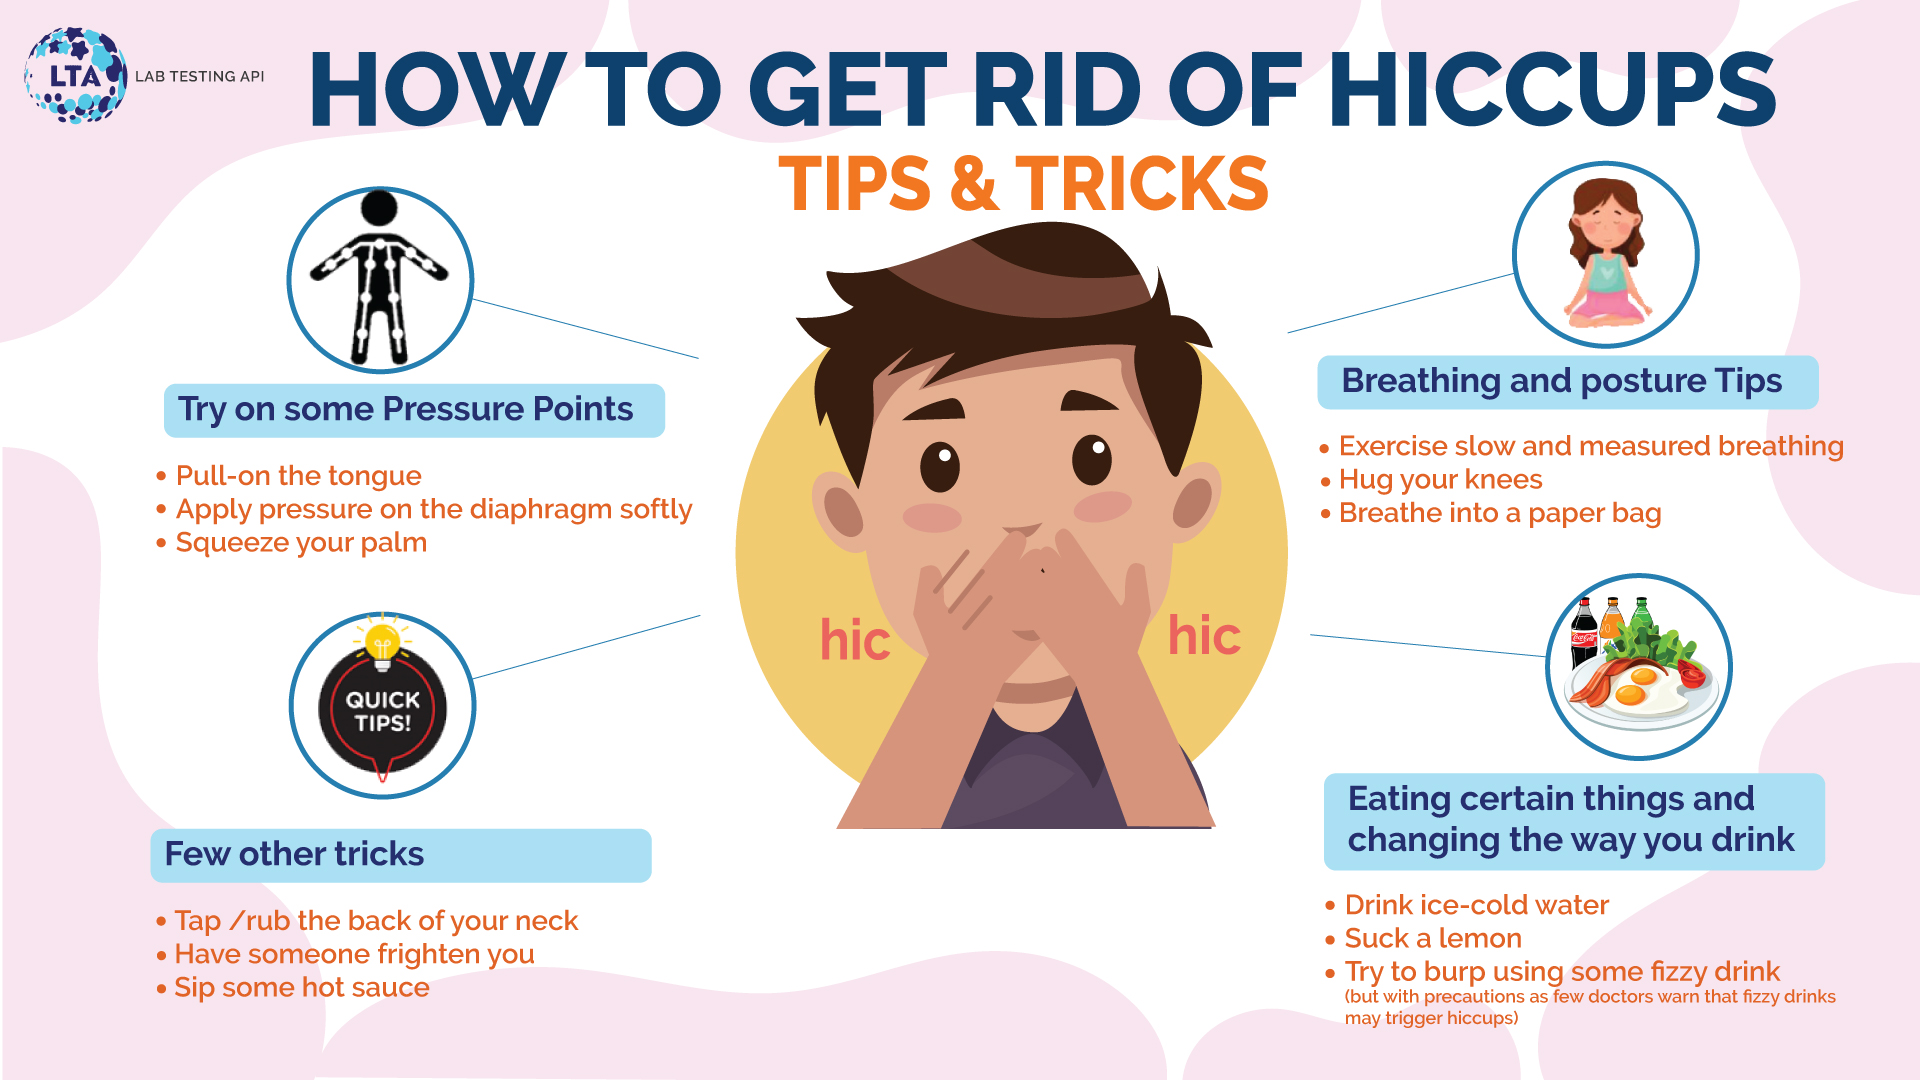 How to get rid of Hiccups: Few quick tips and tricks